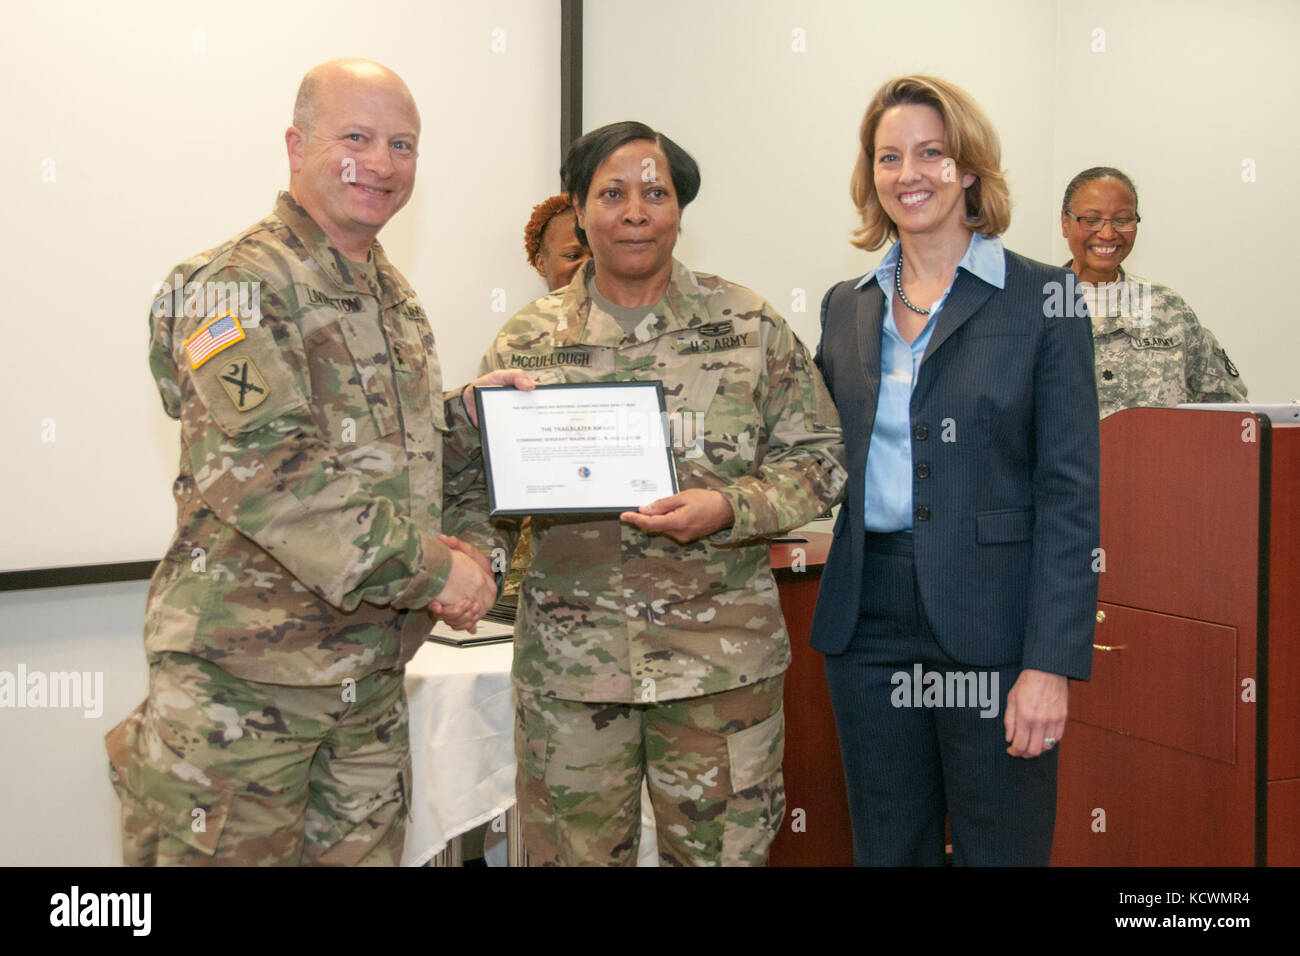 The South Carolina National Guard celebrated women’s history month during a gathering at the Joint Force Headquarters in Columbia, South Carolina, March 23, 2017.  This year's theme honored trailblazing women who paved the way for future generations. The South Carolina Air National Guard's first female fighter pilot, retired Lt. Col. Tally Parham Casey, was the key-note speaker and joined other South Carolina National Guard women who were recognized for their service by U.S. Army Maj. Gen. Robert E. Livingston, Jr. the adjutant general for South Carolina. (U.S. Air National Guard Photo by Tech Stock Photo